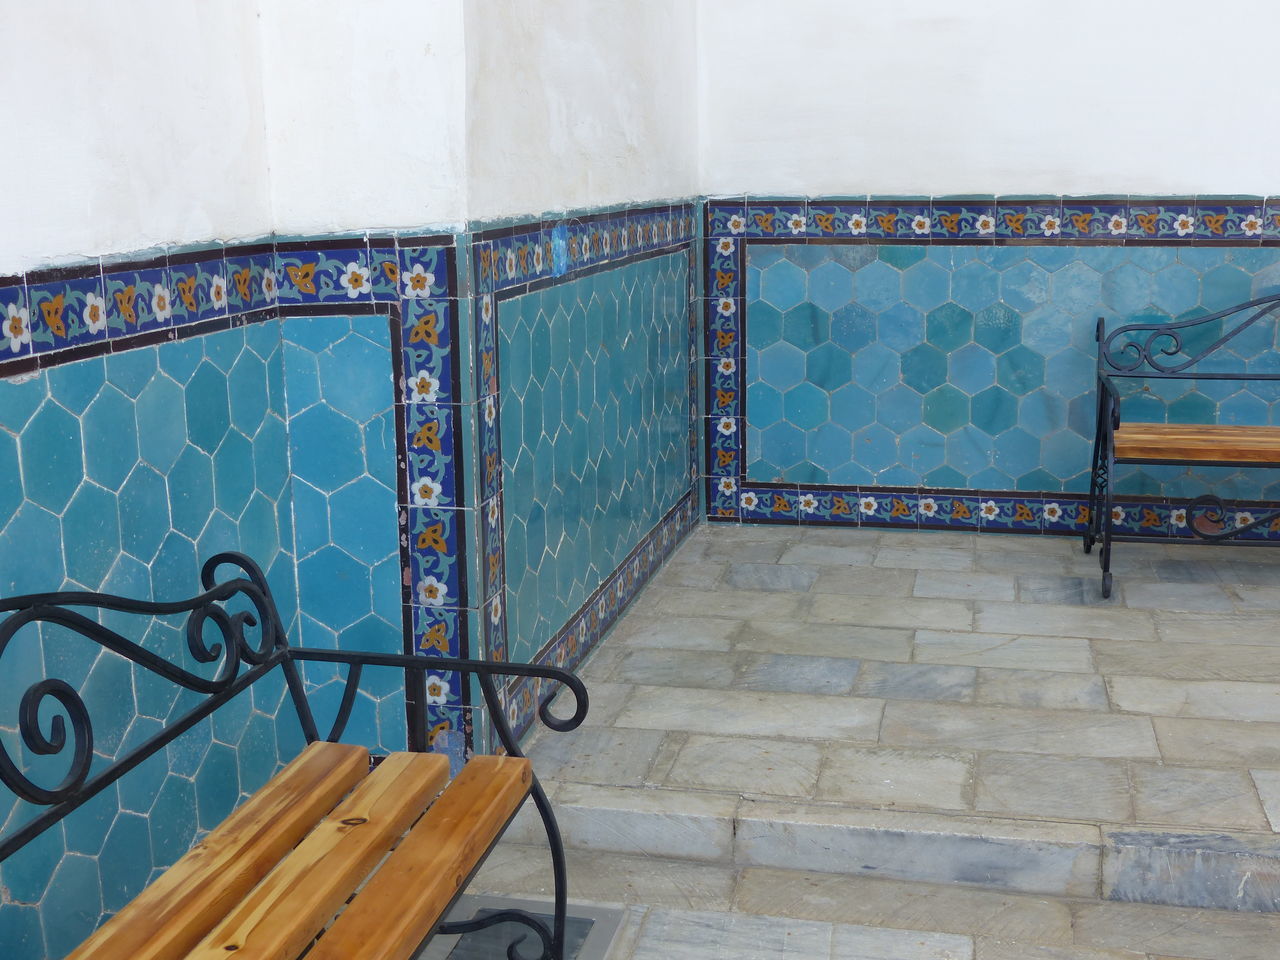 Wall with blue tiles